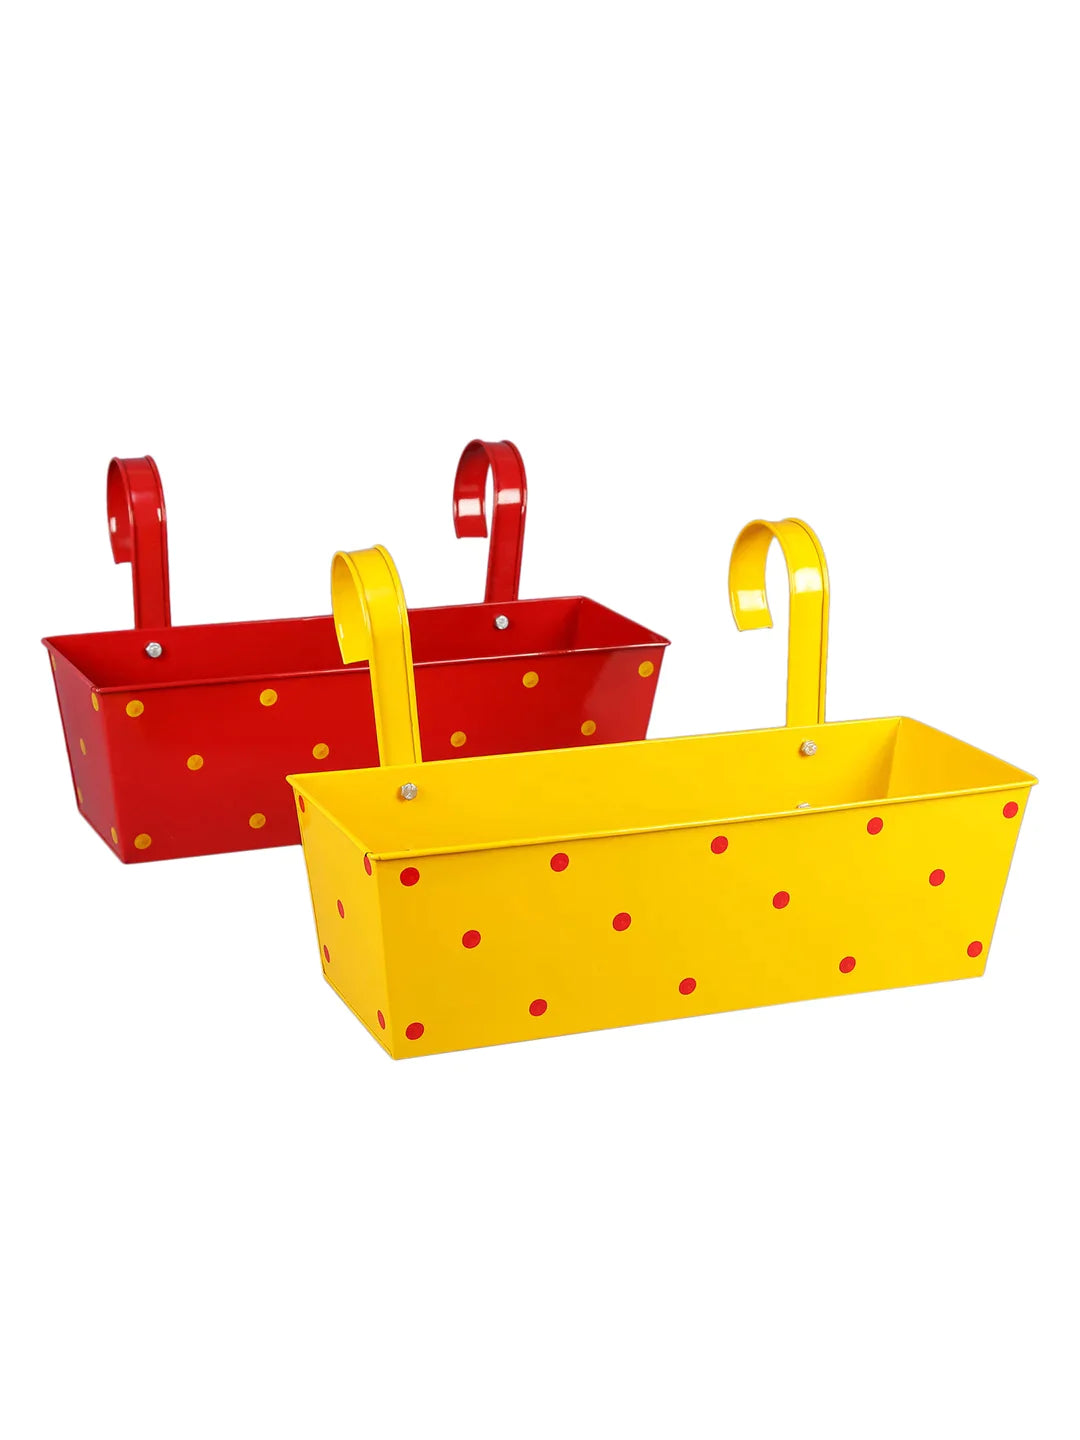 Set of two Polka Dot Rectangle Planter Red & Yellow 18 Inches 